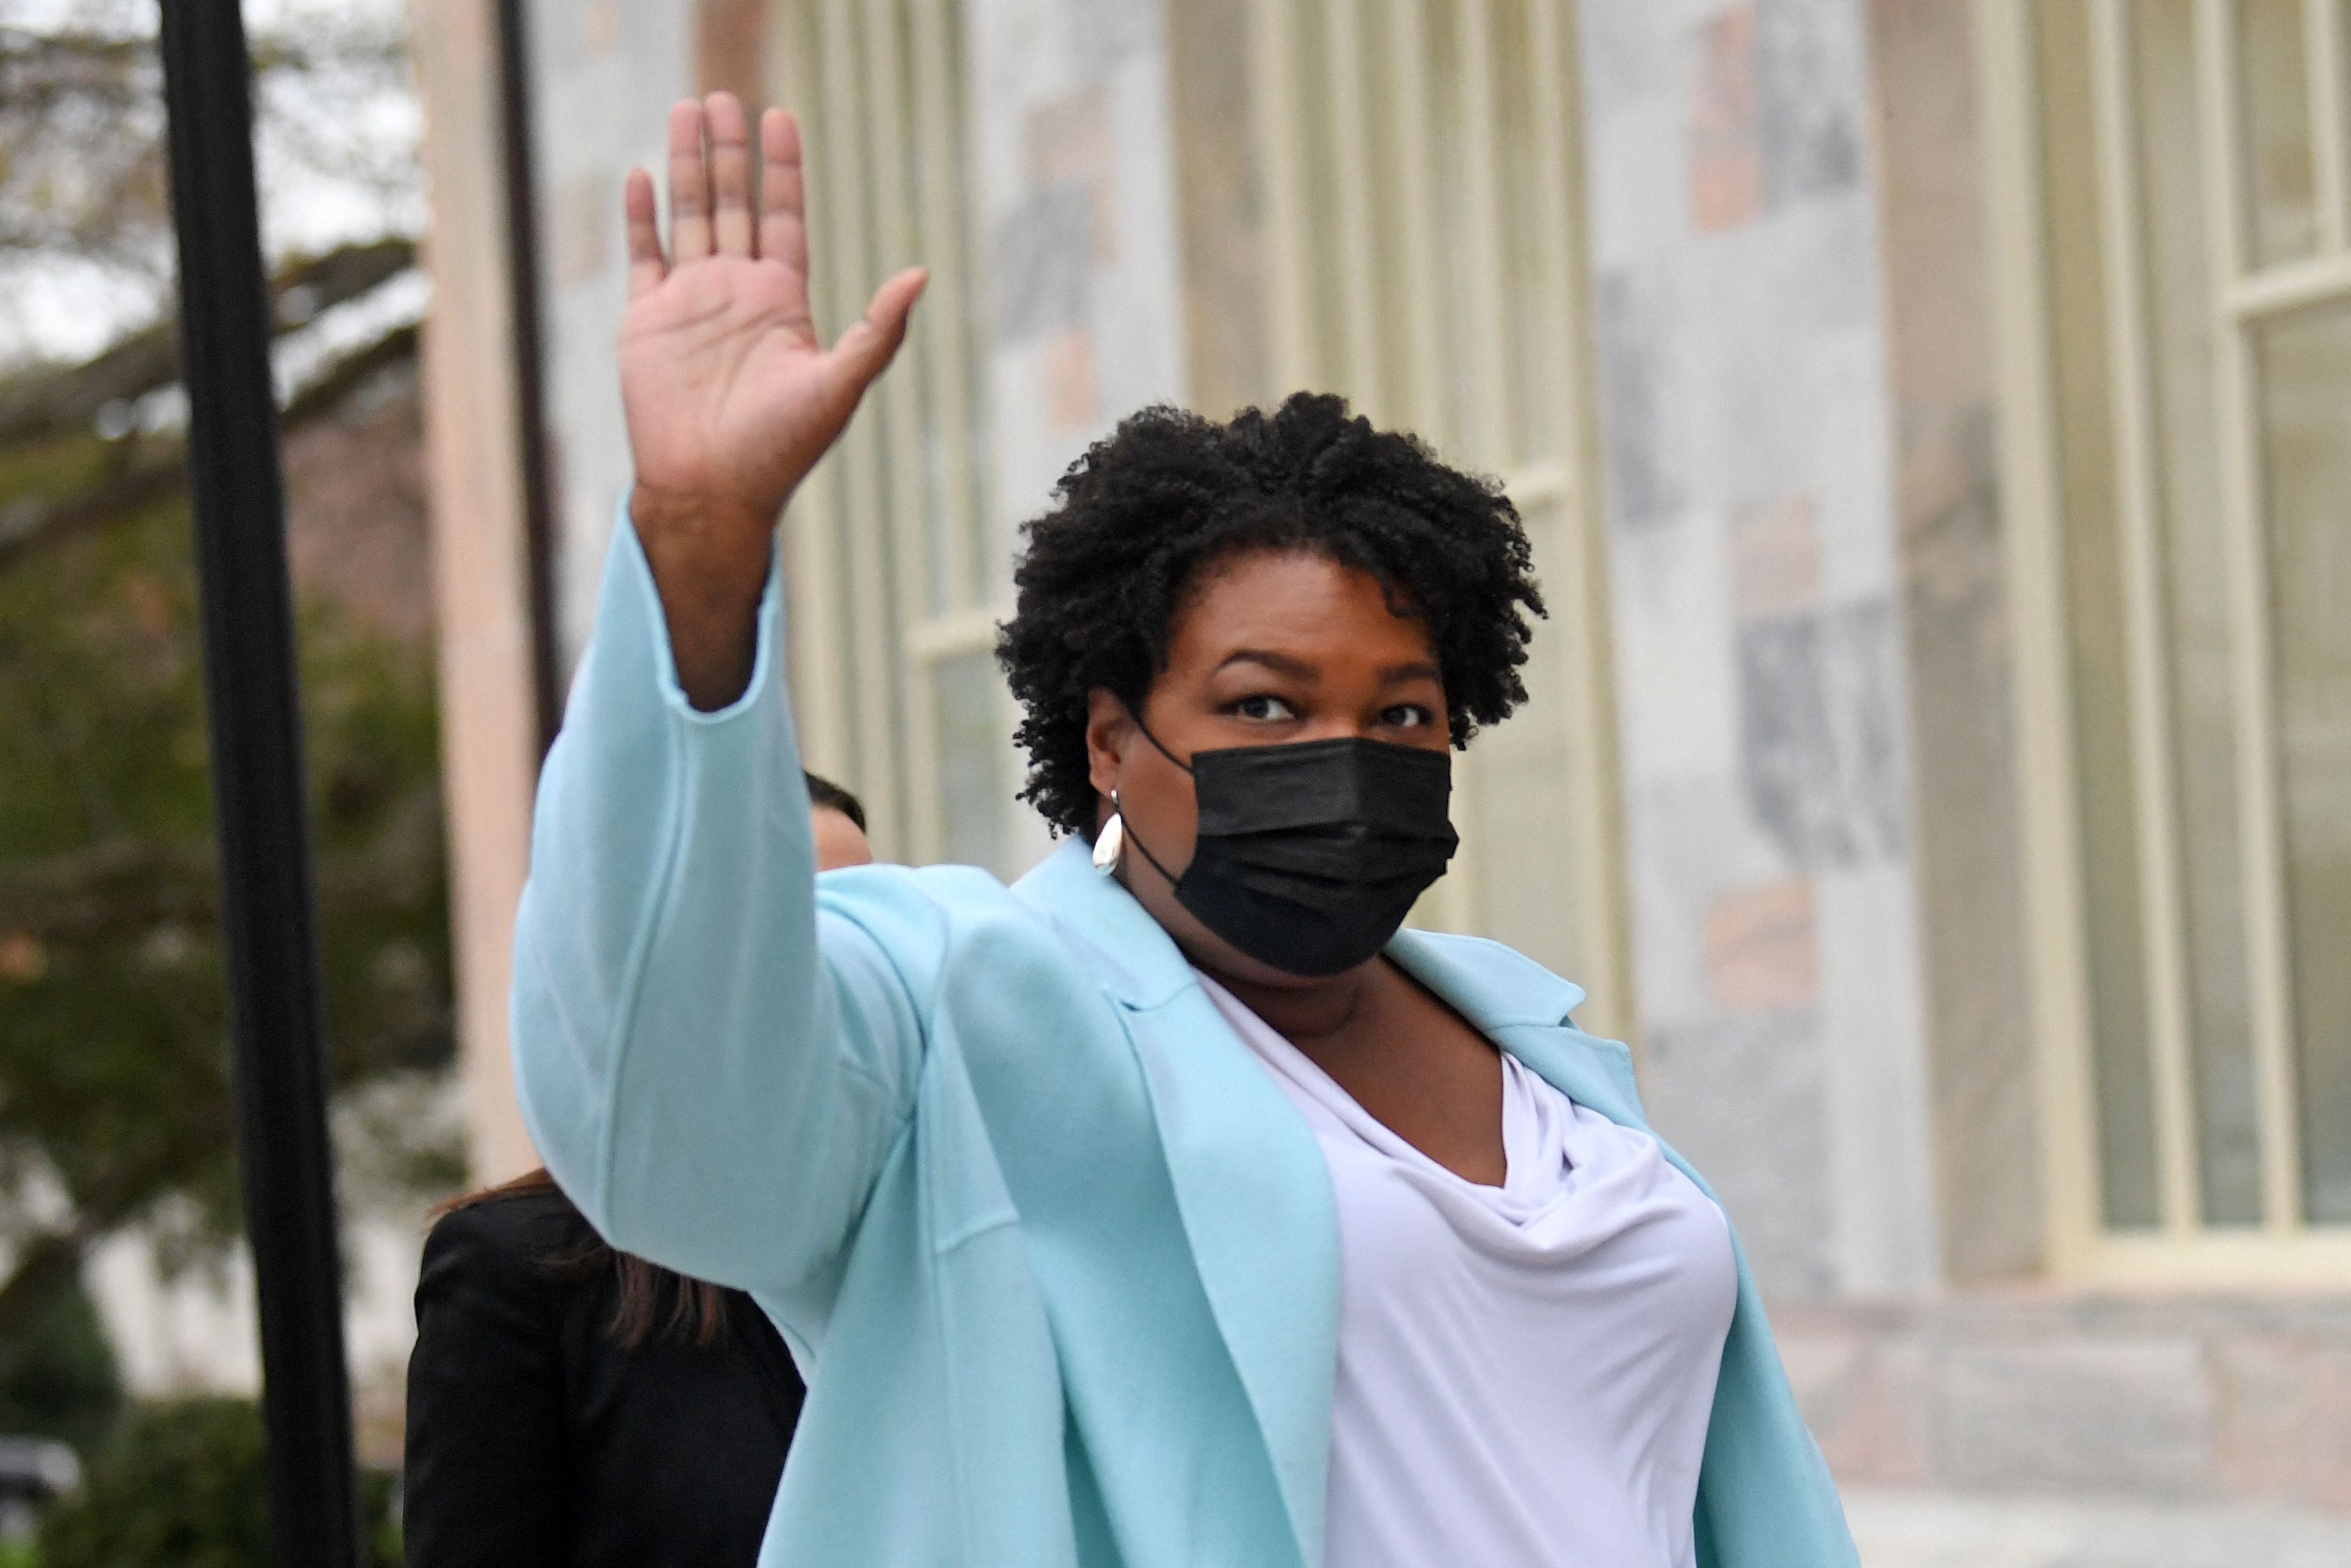 Author, activist and politician Stacey Abrams arrives to meet with US President Joe Biden at Emory University in Atlanta, Georgia